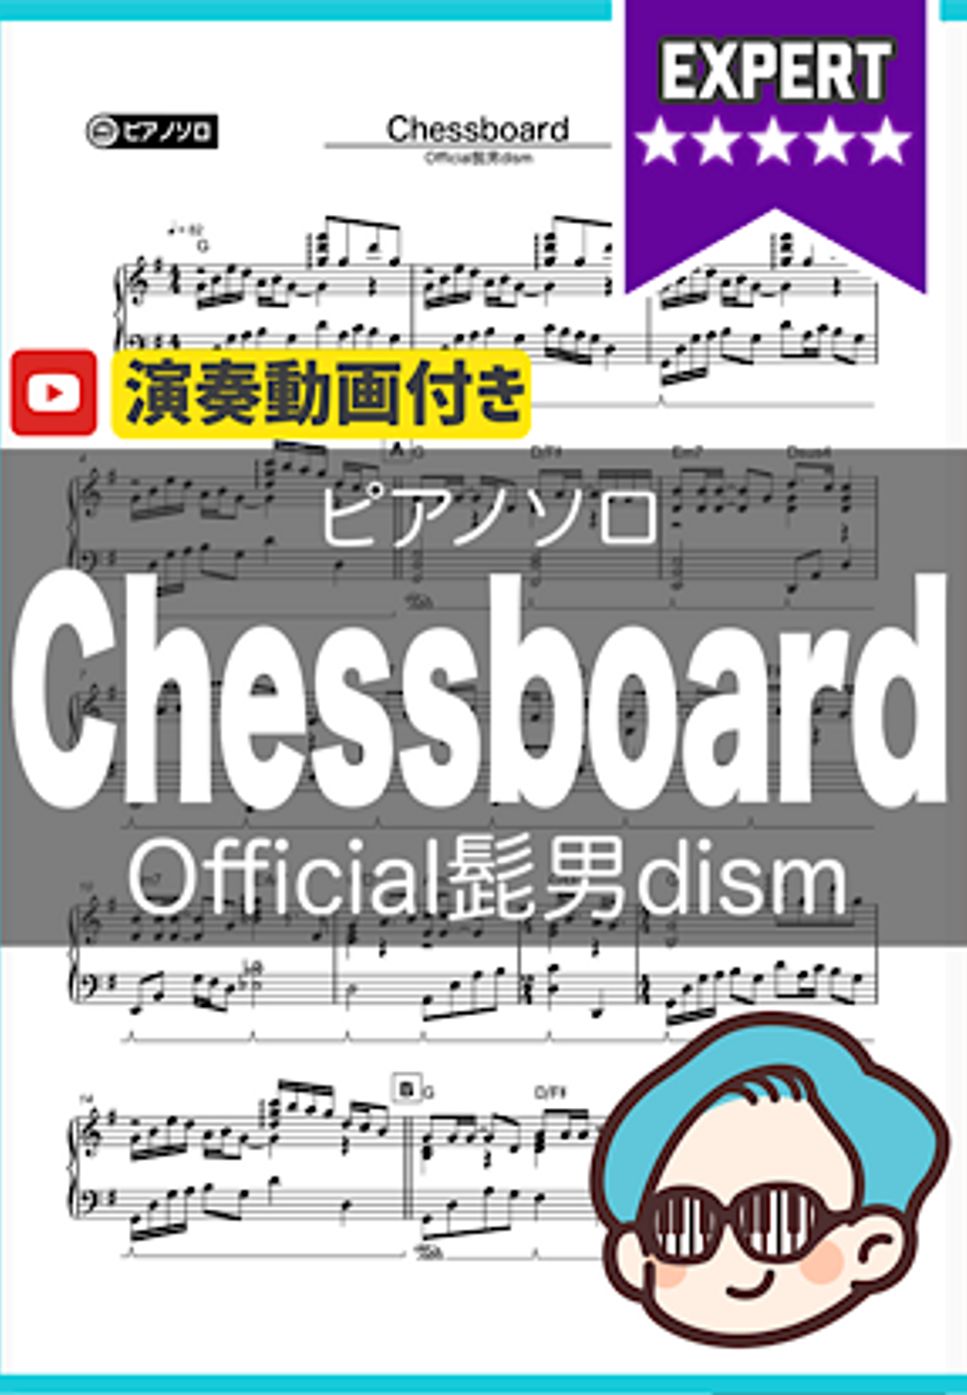 Official髭男dism - Chessboard by シータピアノ